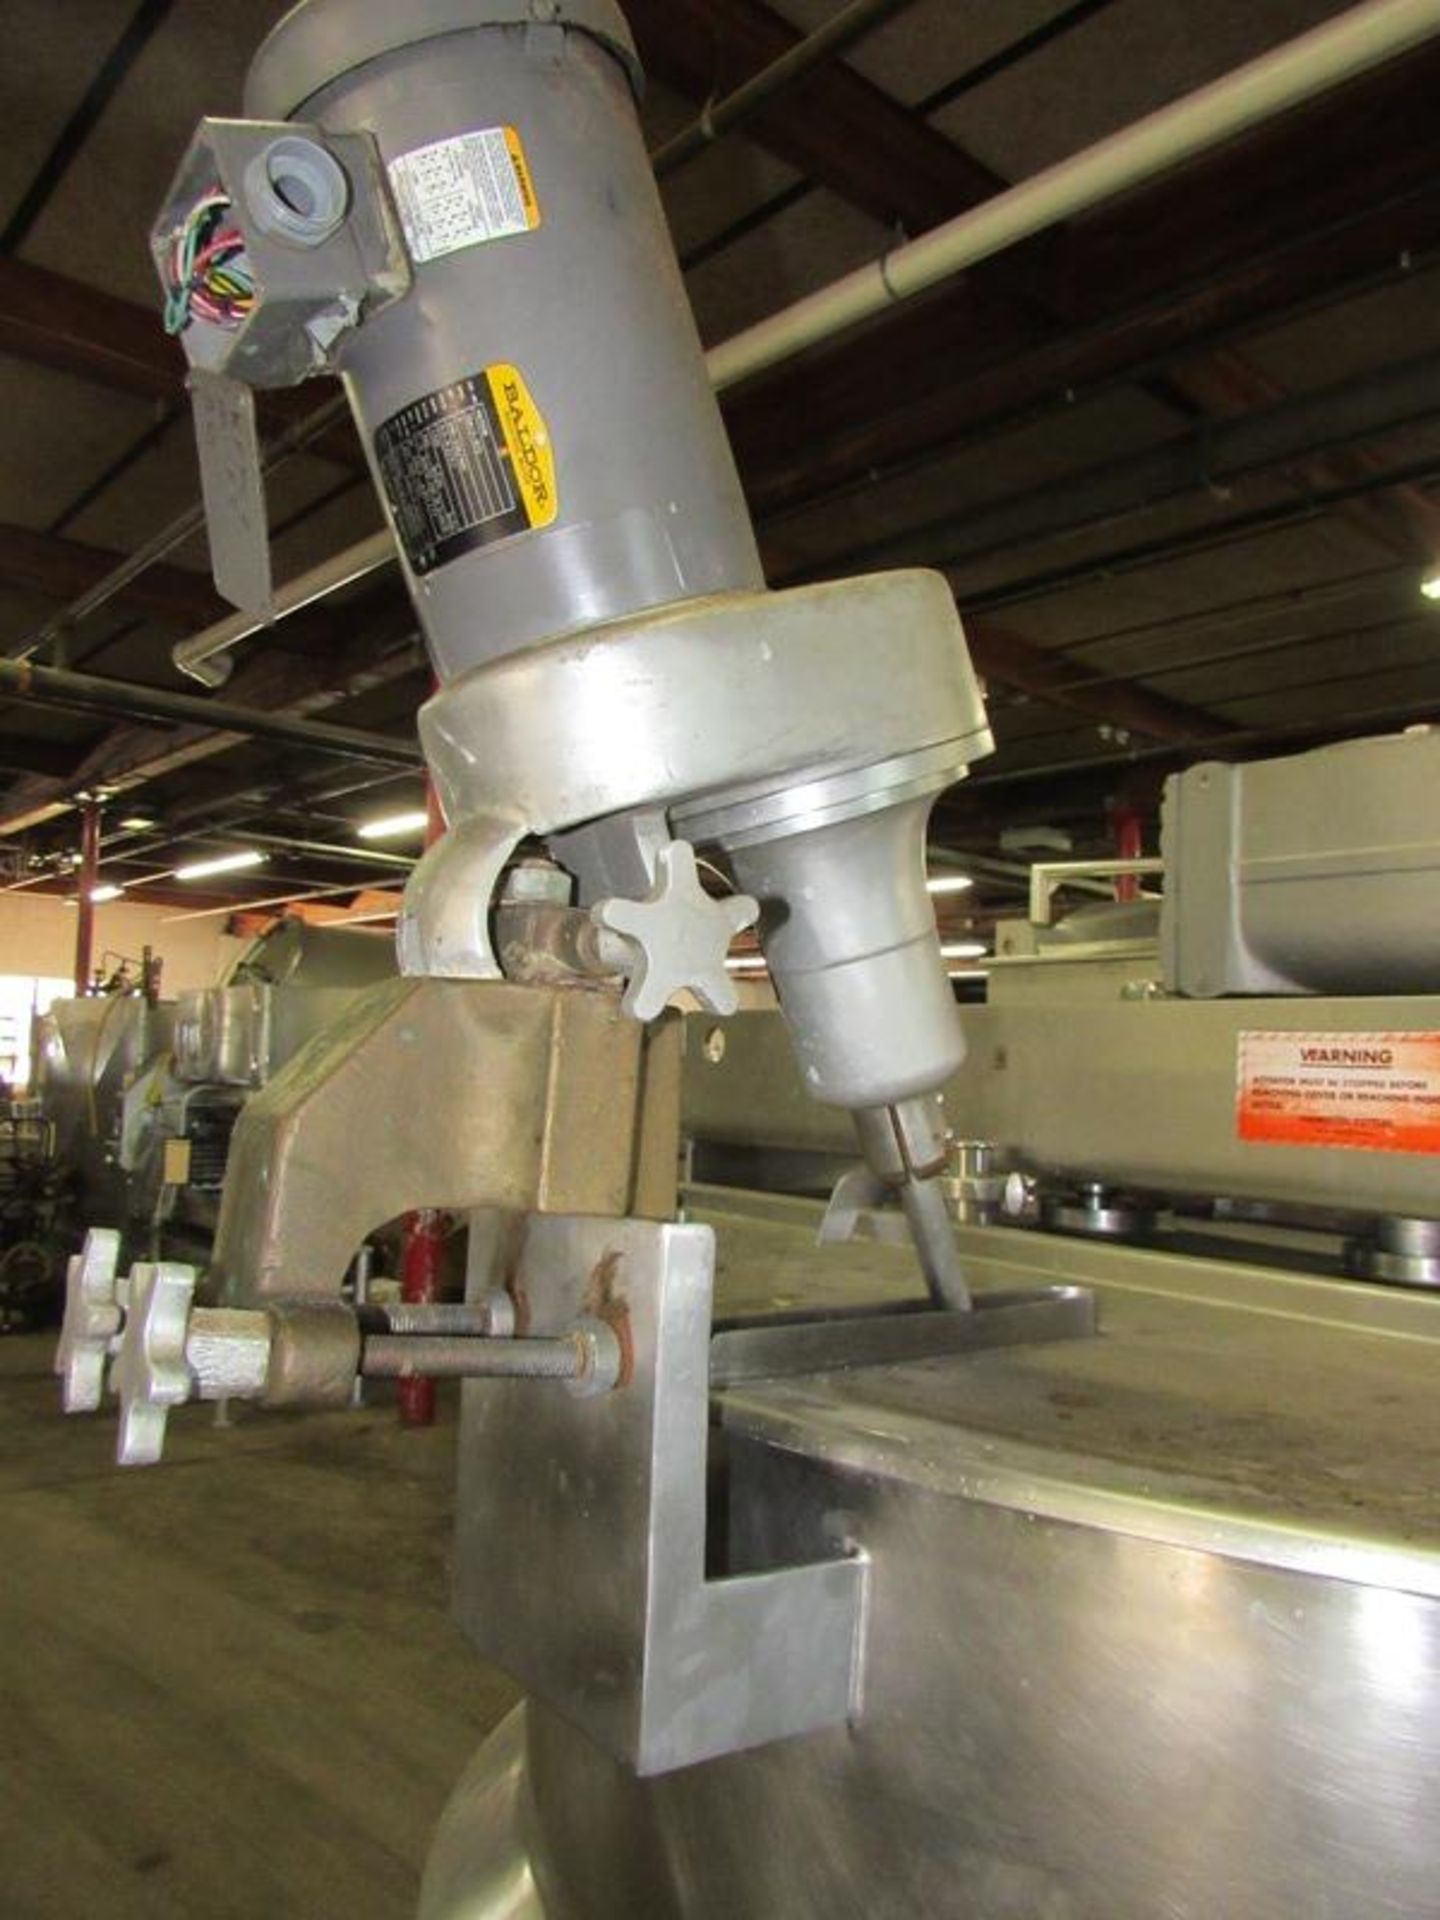 Hamilton Stainless Steel Jacketed Kettle with side bottom scrape agitation, stainless steel mixer - Image 5 of 23